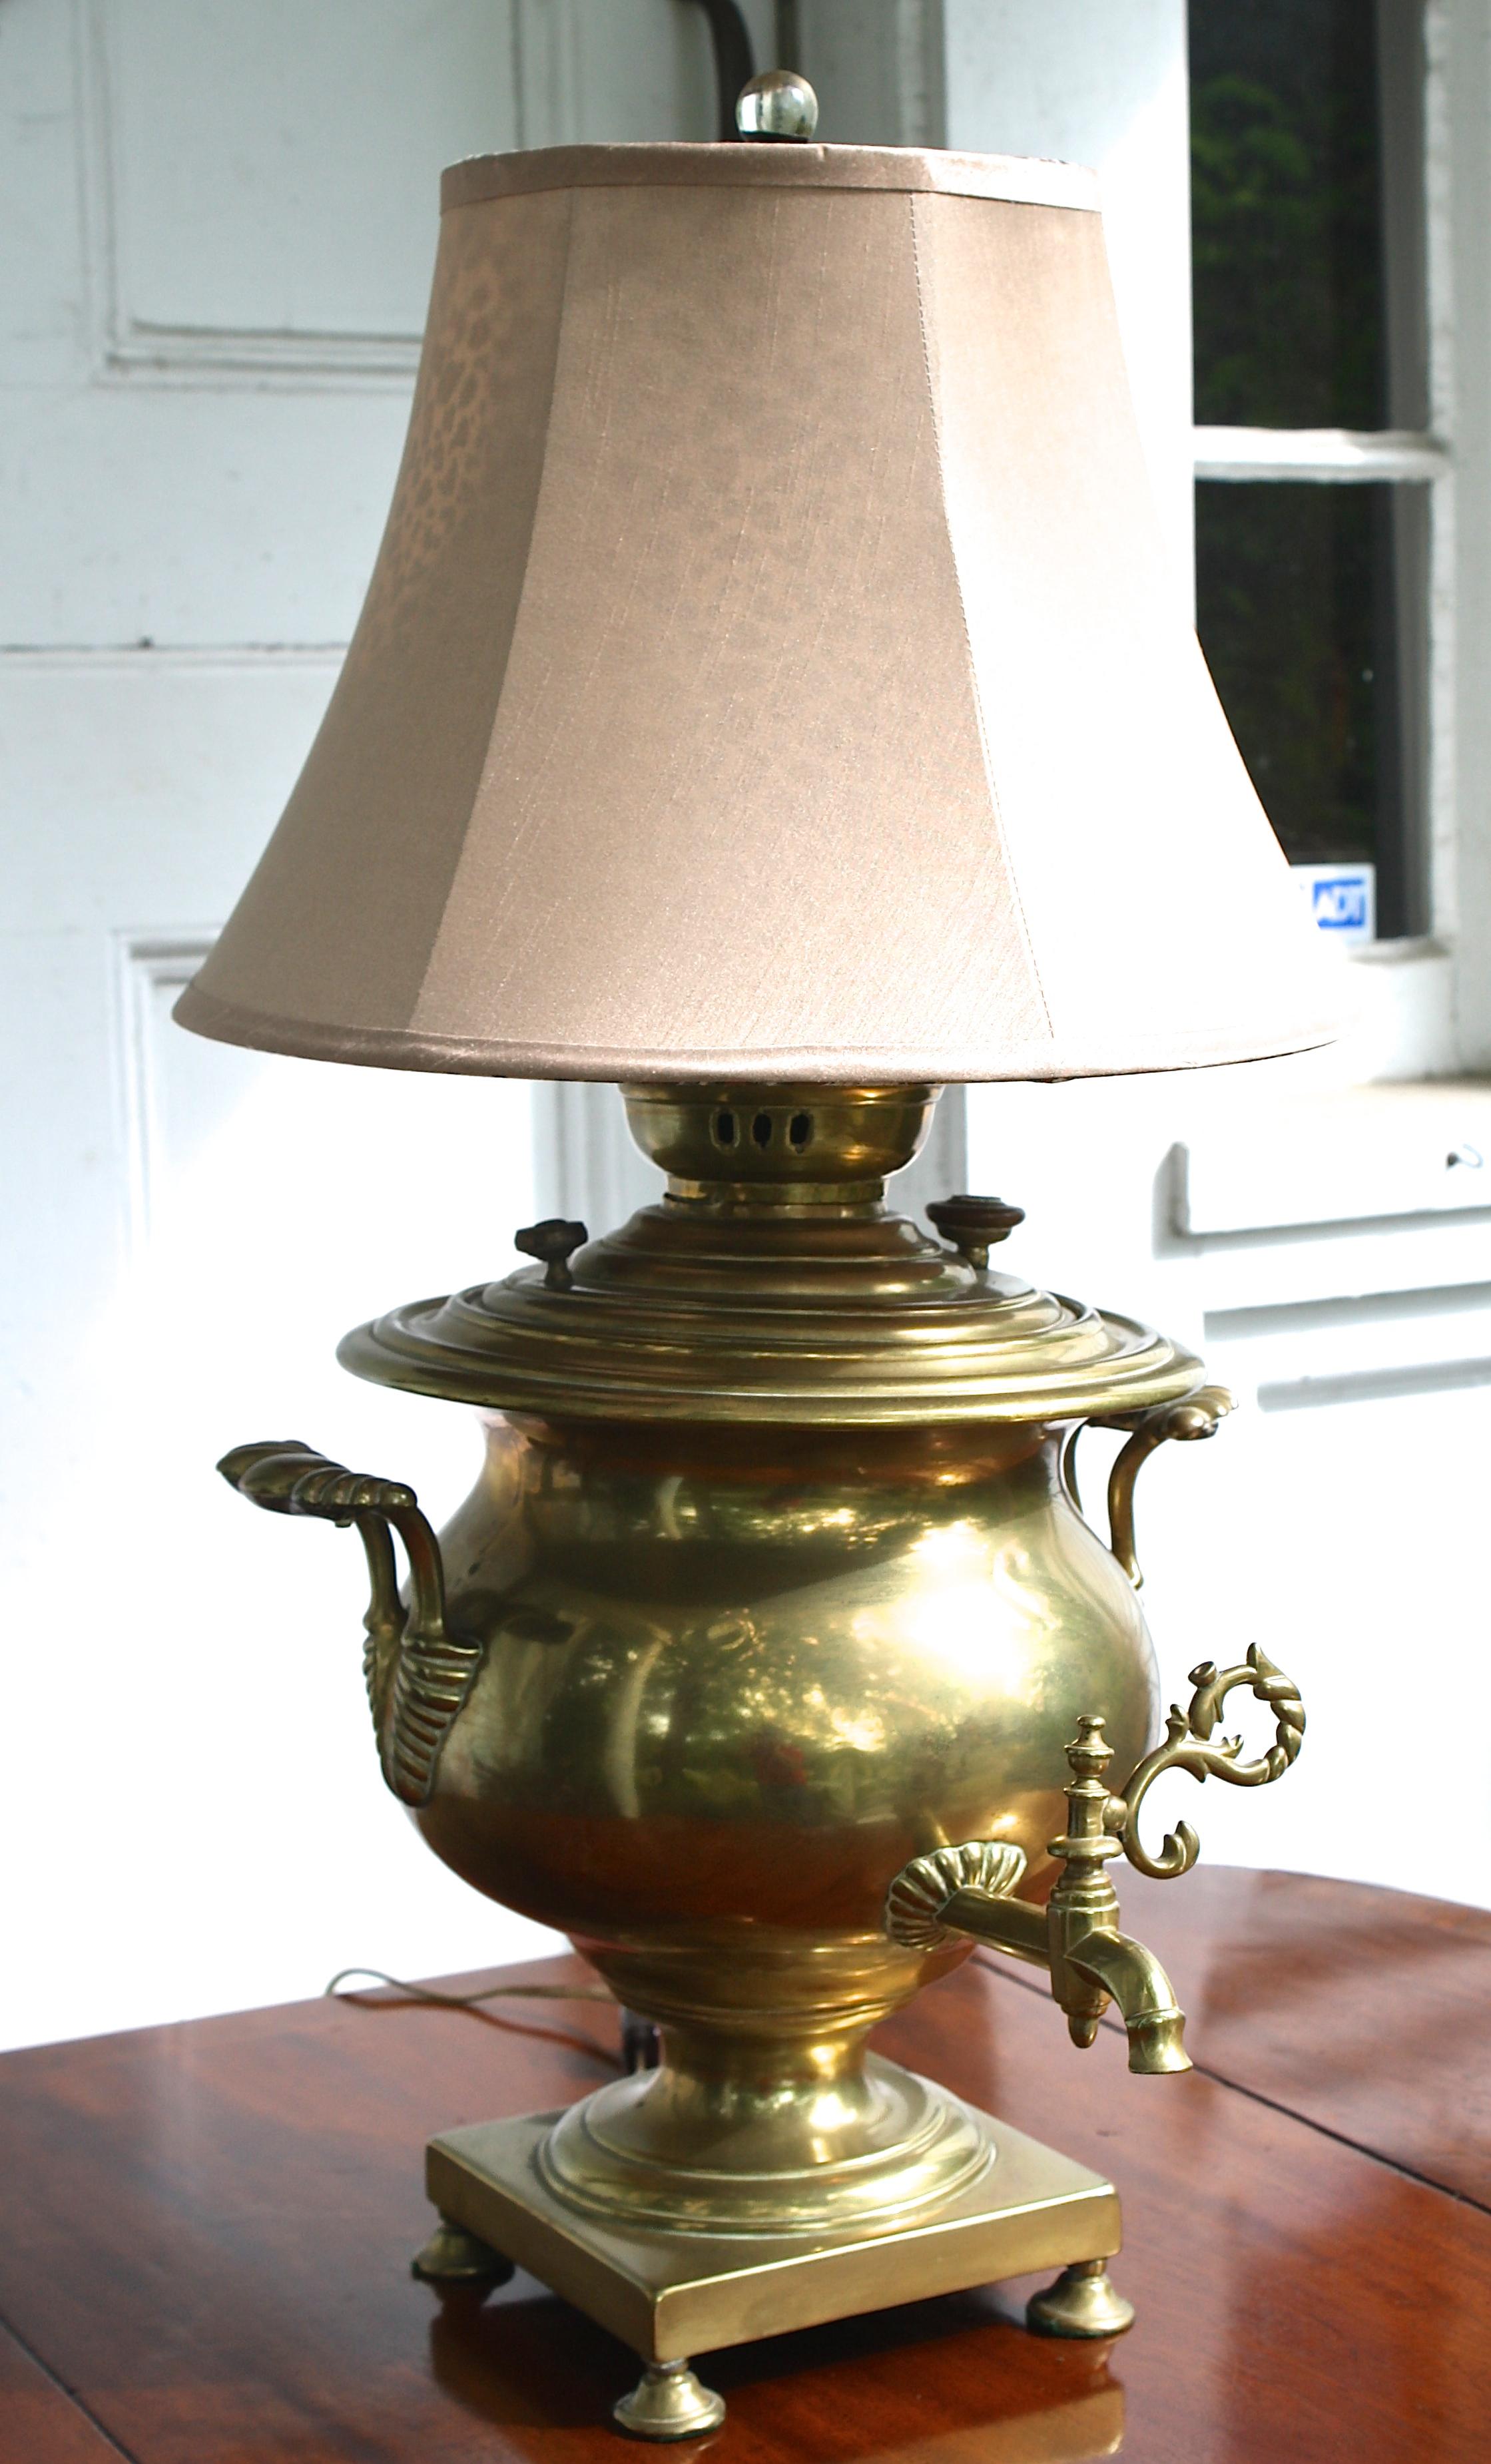 Dating from the reign of Alexander III (1881-1894), a Russian brass samovar mounted as a table lamp in the mid-late 20th century. Structurally intact with minimally invasive mounting. The samovar measures 17 inches tall by 16 inches diameter. The